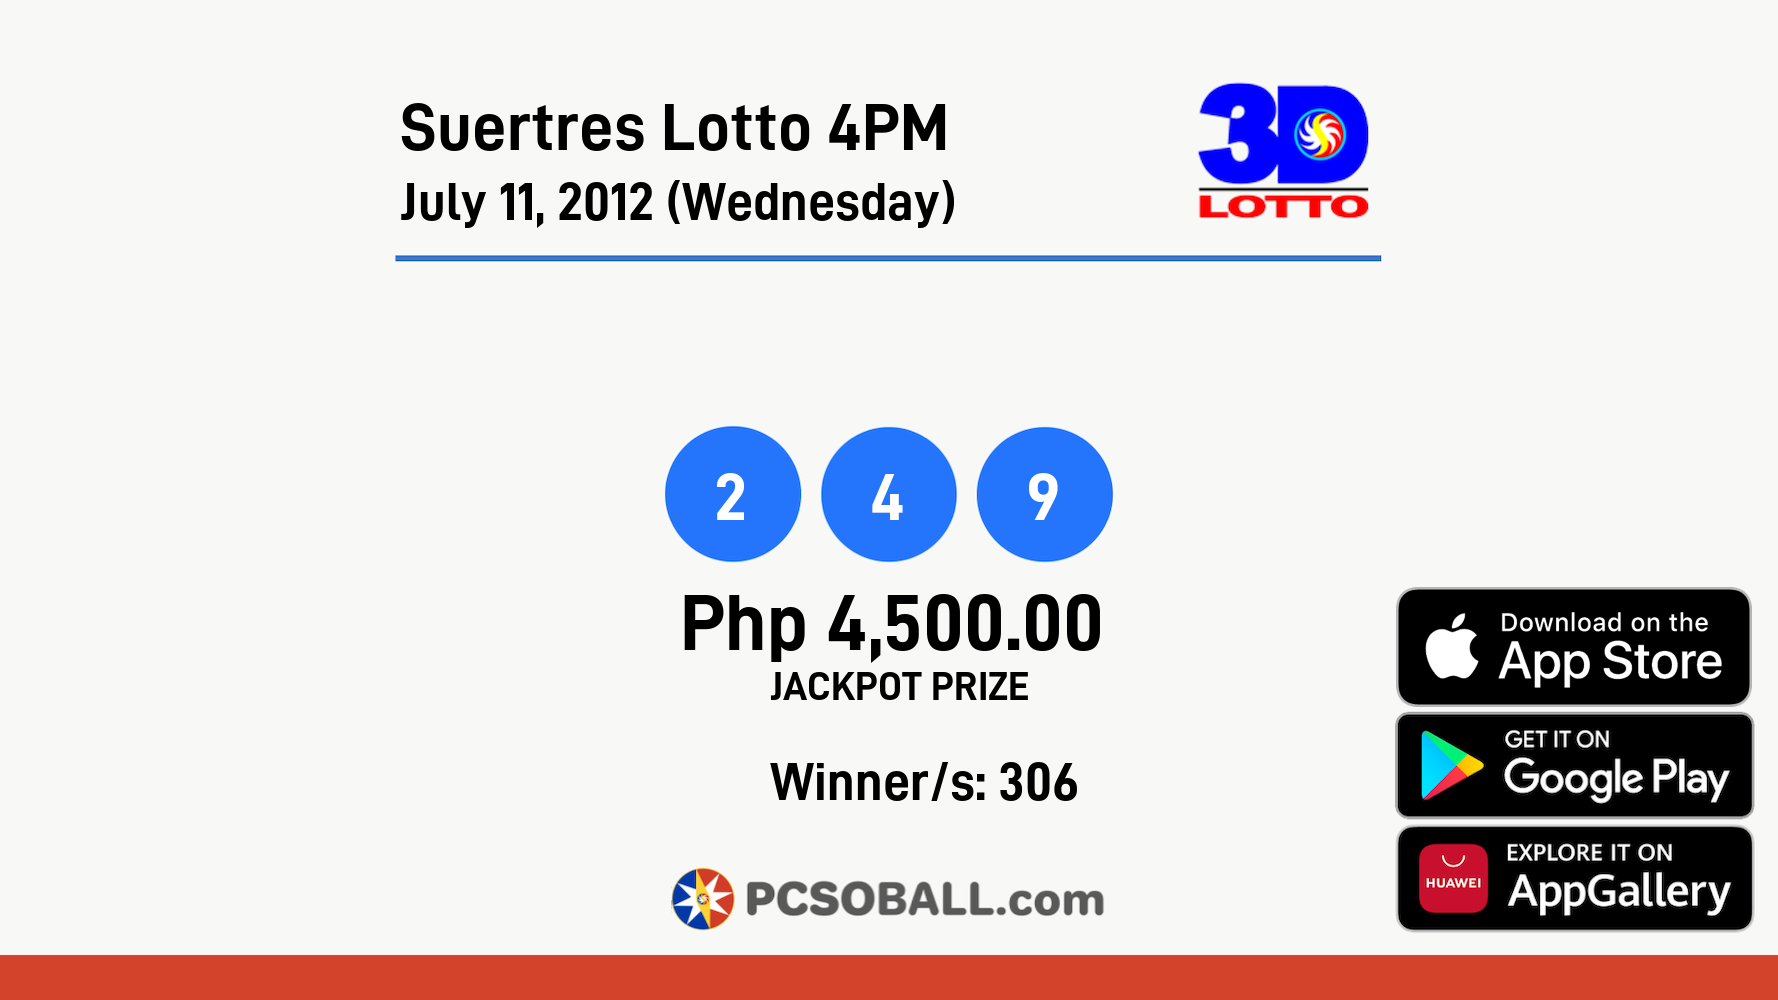 Suertres Lotto 4PM July 11, 2012 (Wednesday) Result